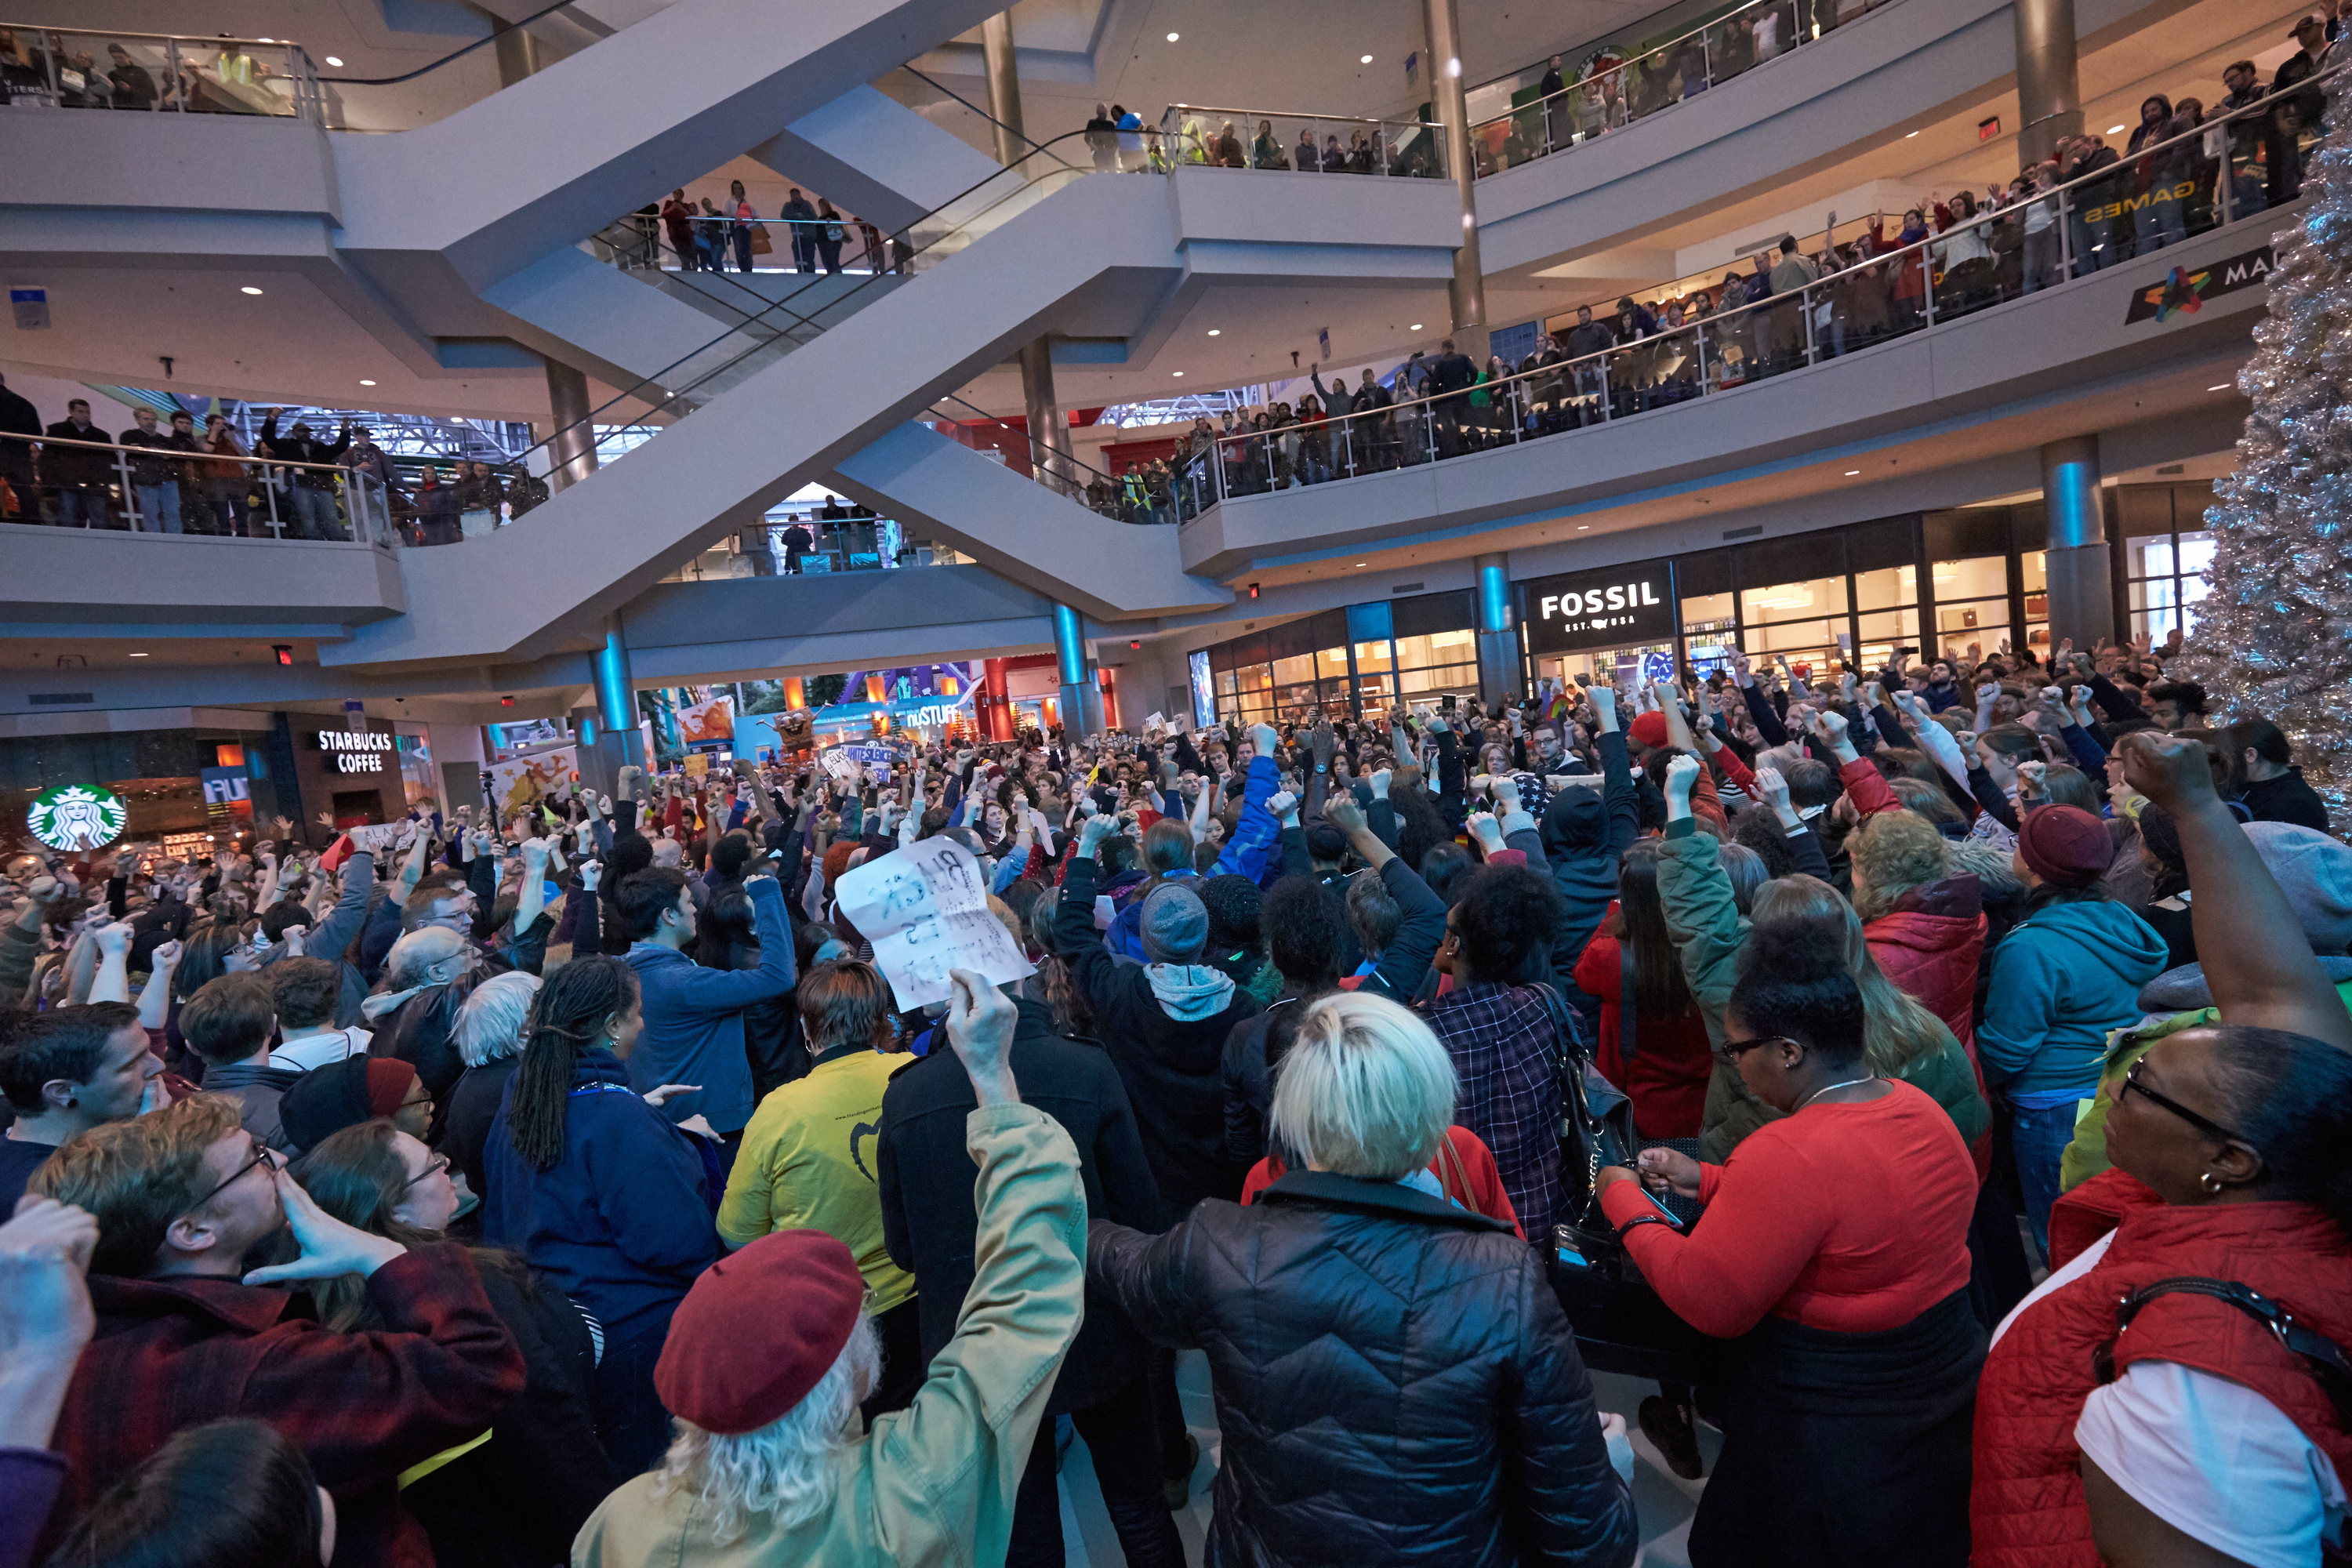 Thousands of protesters from the group "Black Lives Matter" disrupt holiday shoppers on Dec. 20, 2014 at Mall of America in Bloomington, Minnesota. ((Photo by Adam Bettcher/Getty Images))